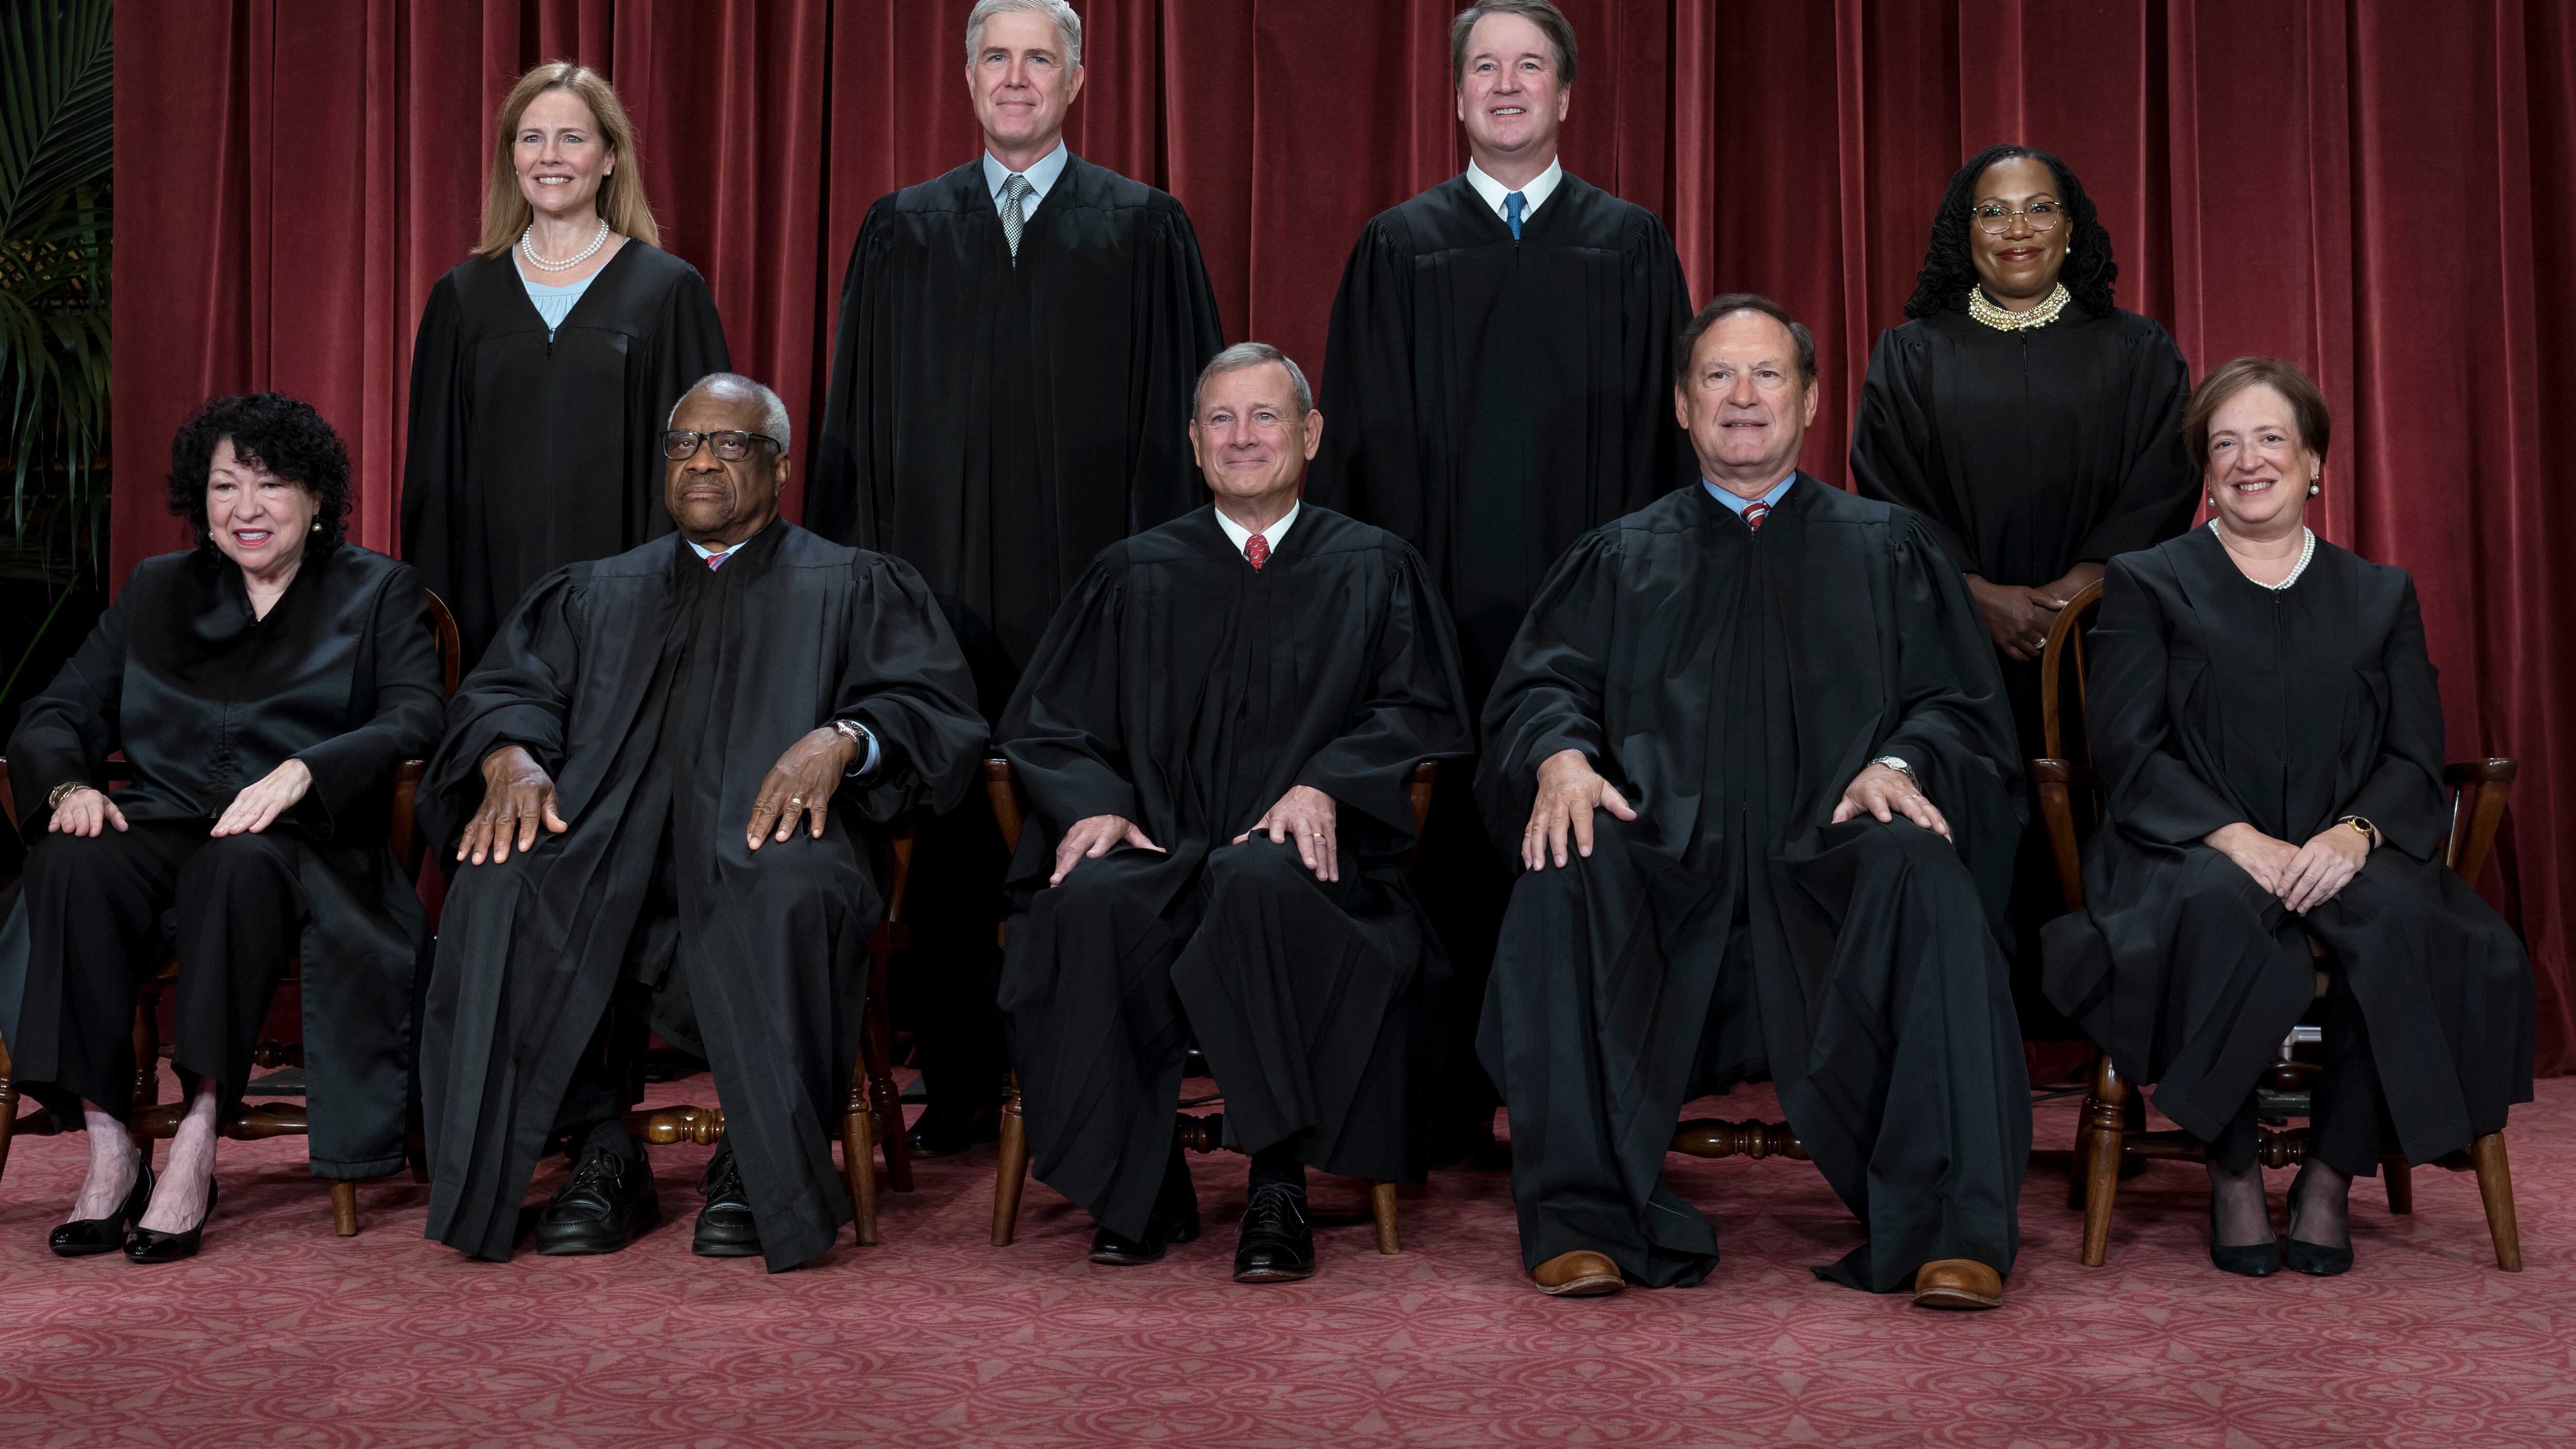 Members of the Supreme Court sit for a group portrait in Washington (J Scott Applewhite/AP)